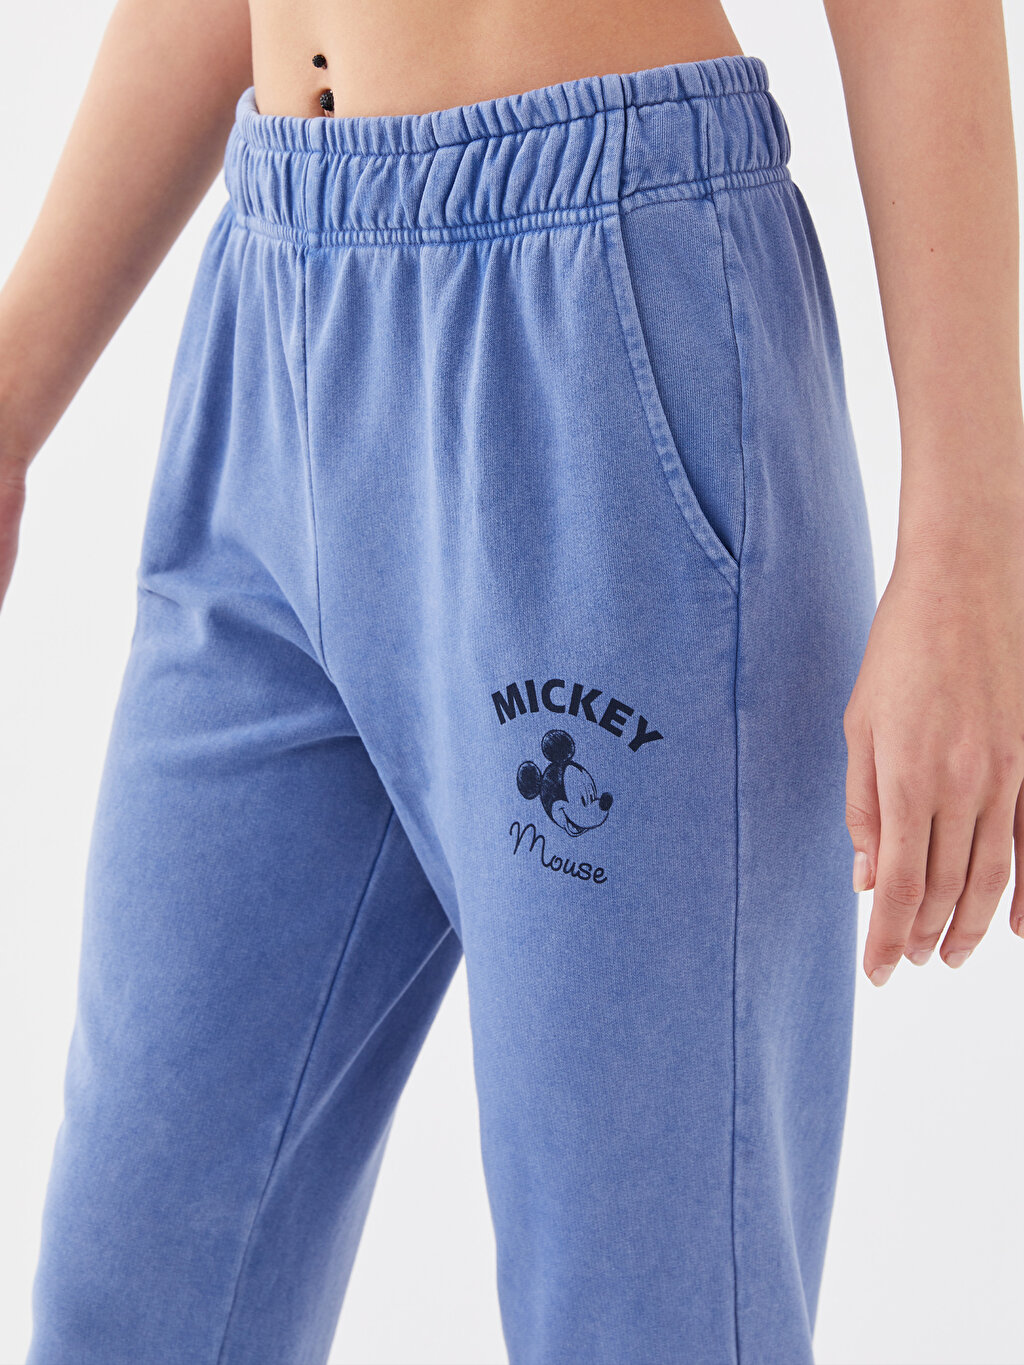 Mickey Mouse Genuine Mousewear Sweatpants for Adults – Black